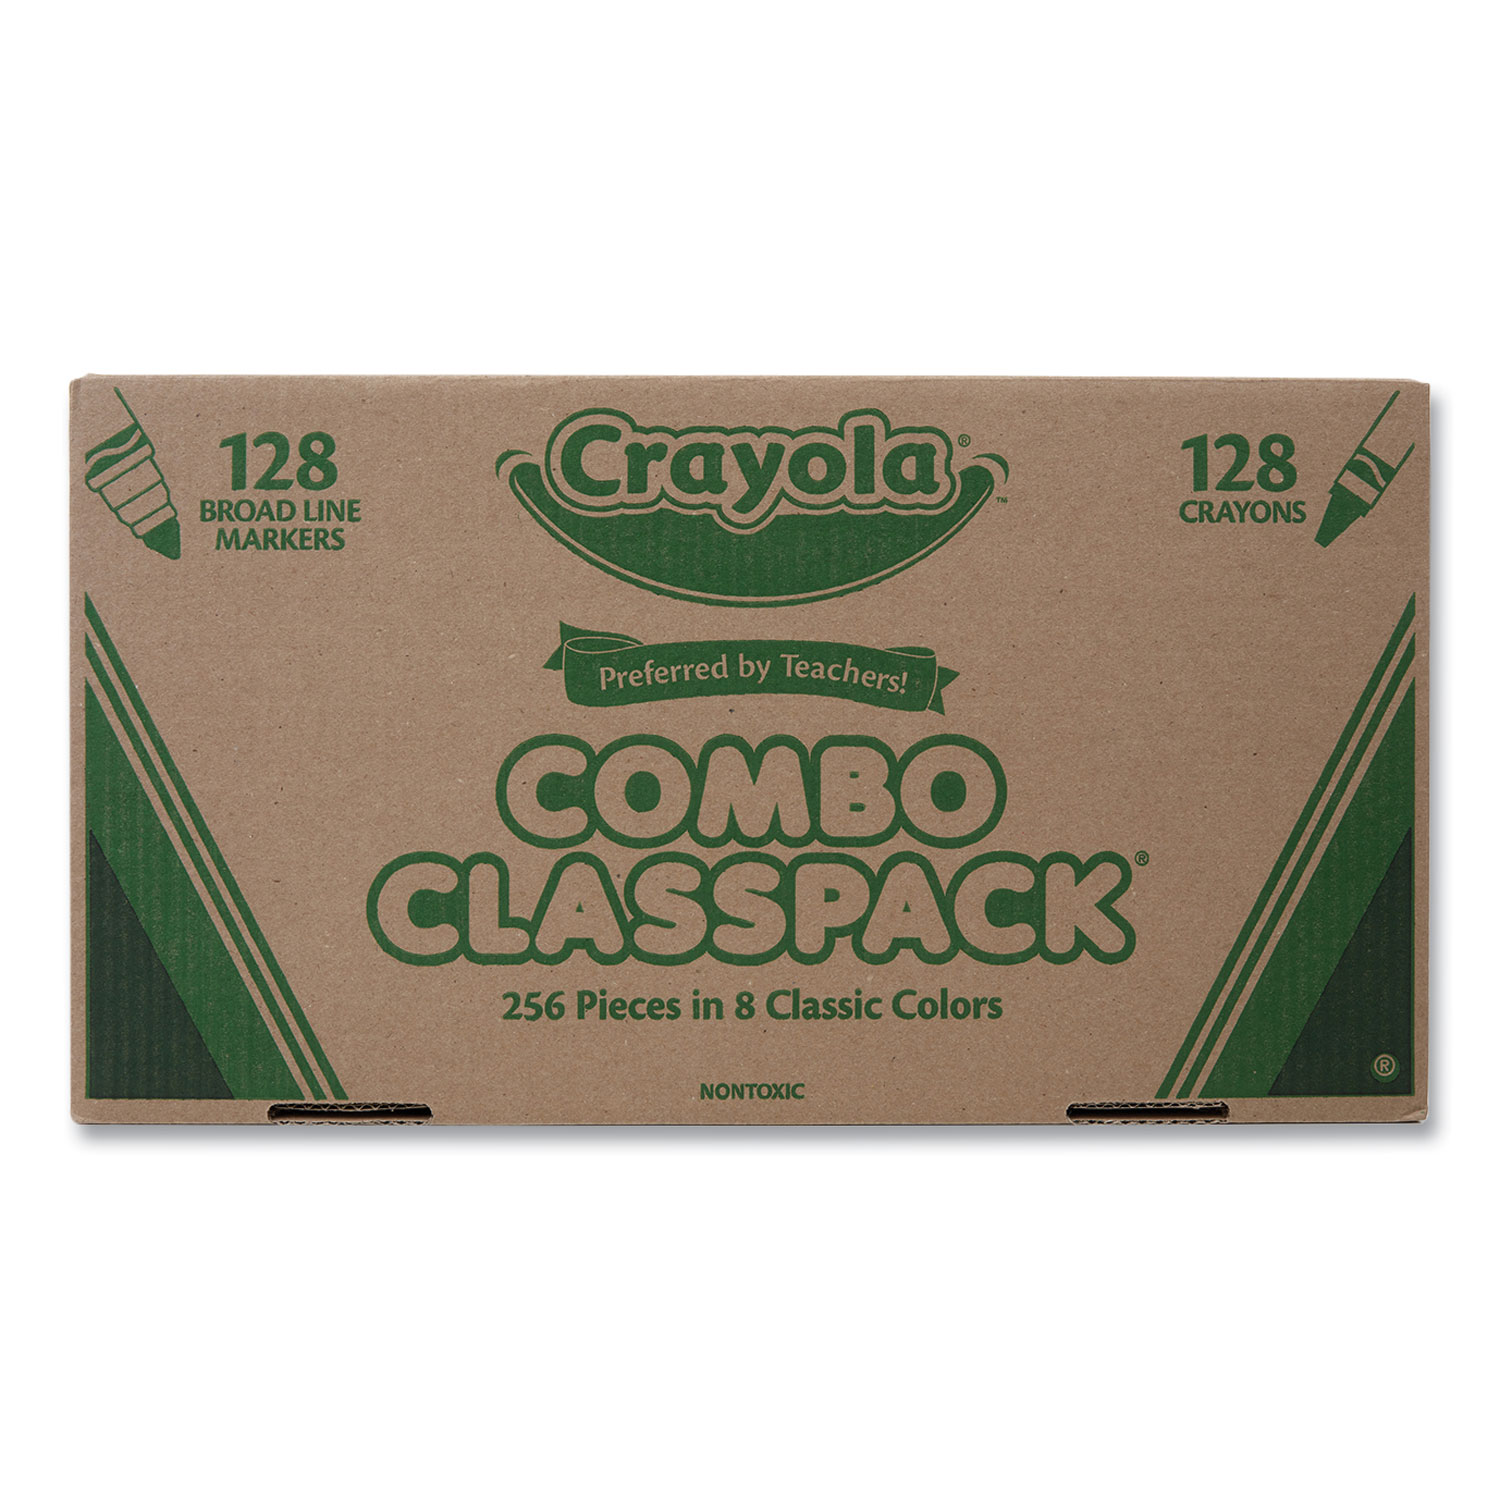 Crayola Classic Bundle: 3 Items - Crayons (24 Count) Broad Line Markers (10 Count) Colored Pencils (12 Count)